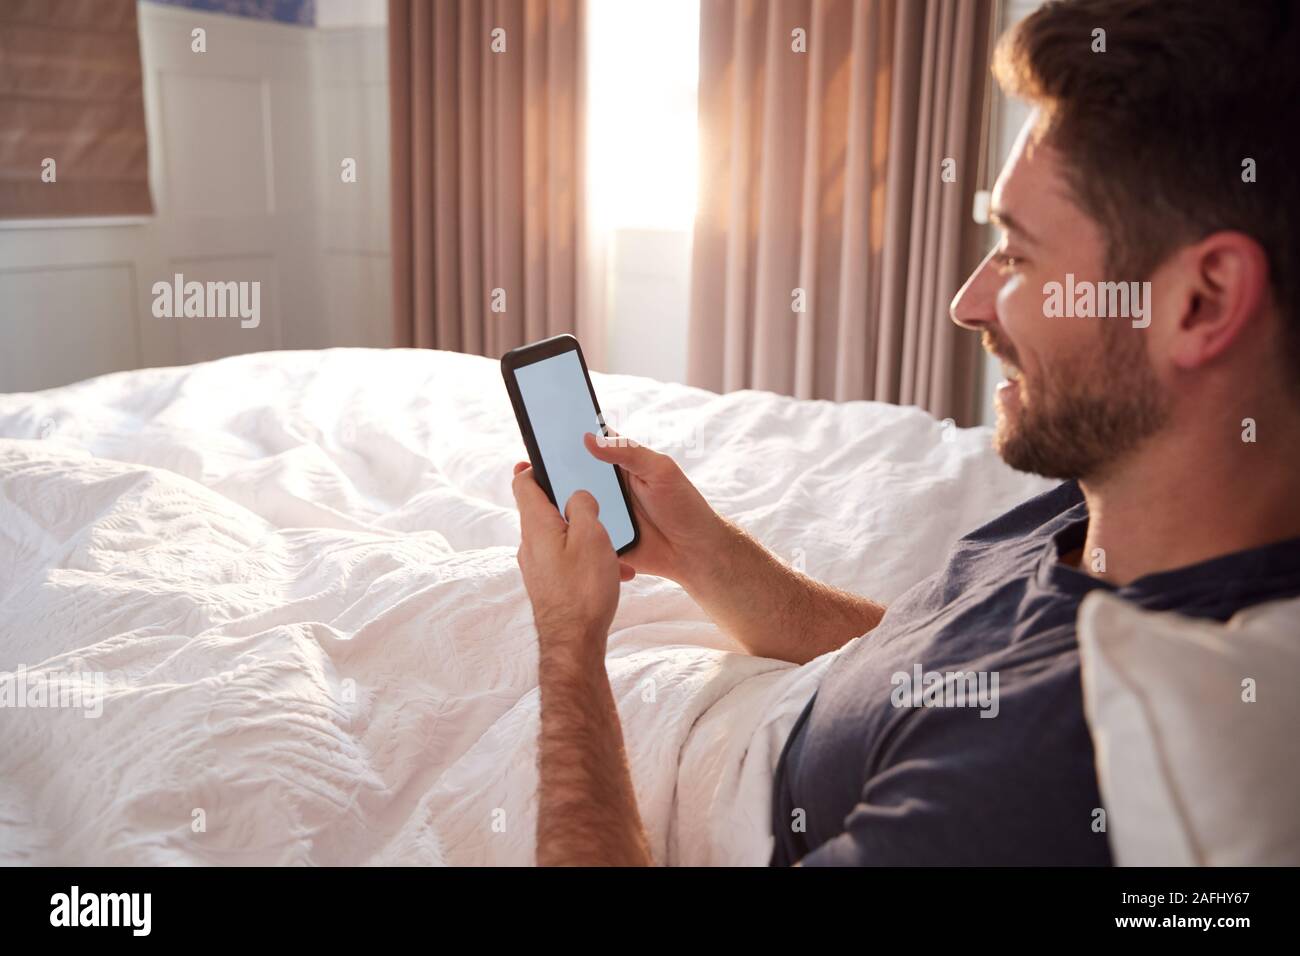 Man Sitting Up In Bed Looking At Mobile Phone After Having Woken Up Stock Photo